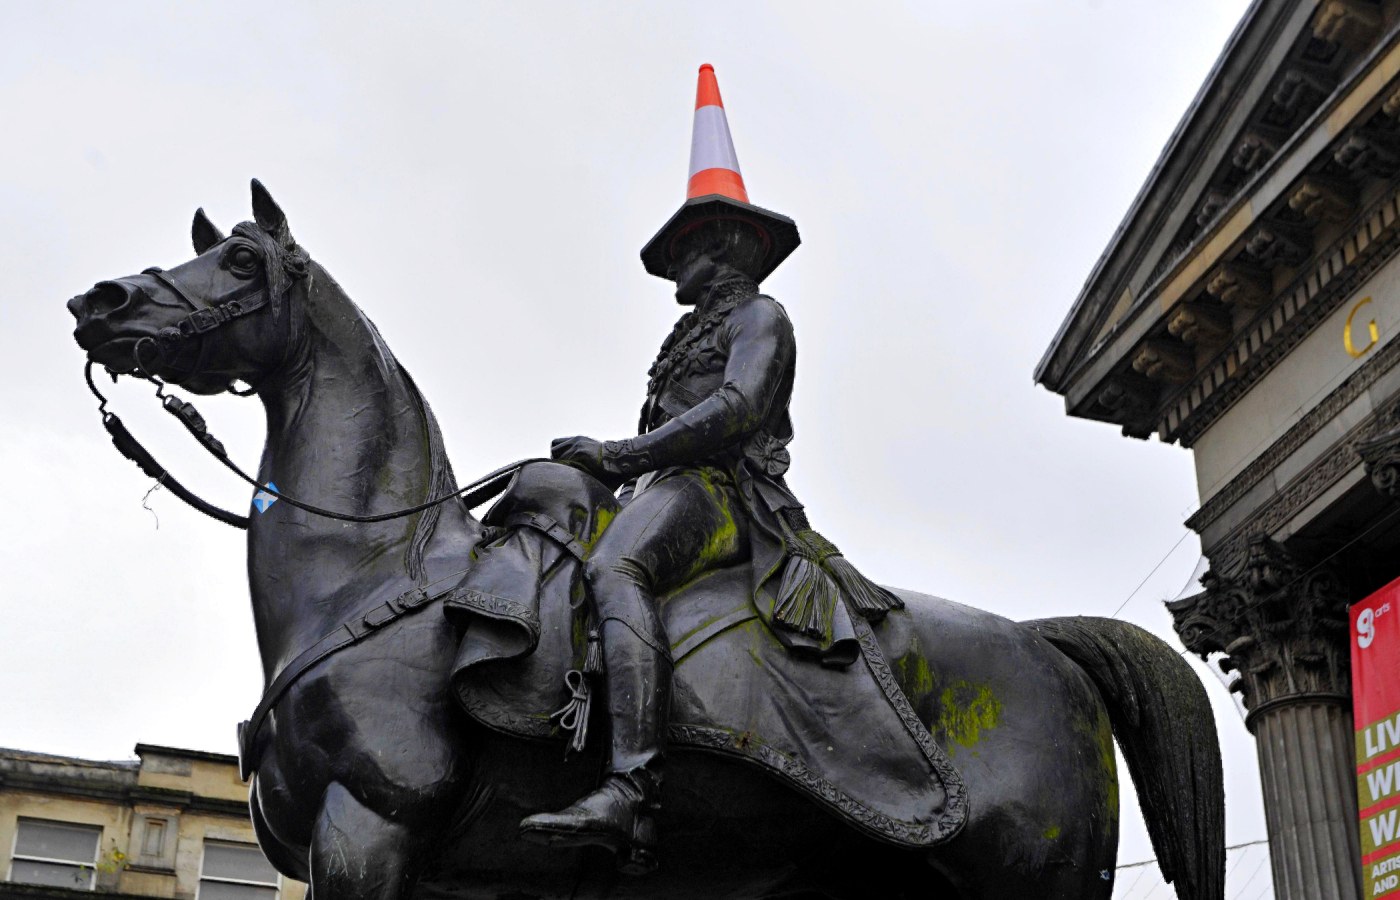 My favourite work of art': Duke of Wellington cone statue at Gallery of  Modern Art lures Banksy to Glasgow